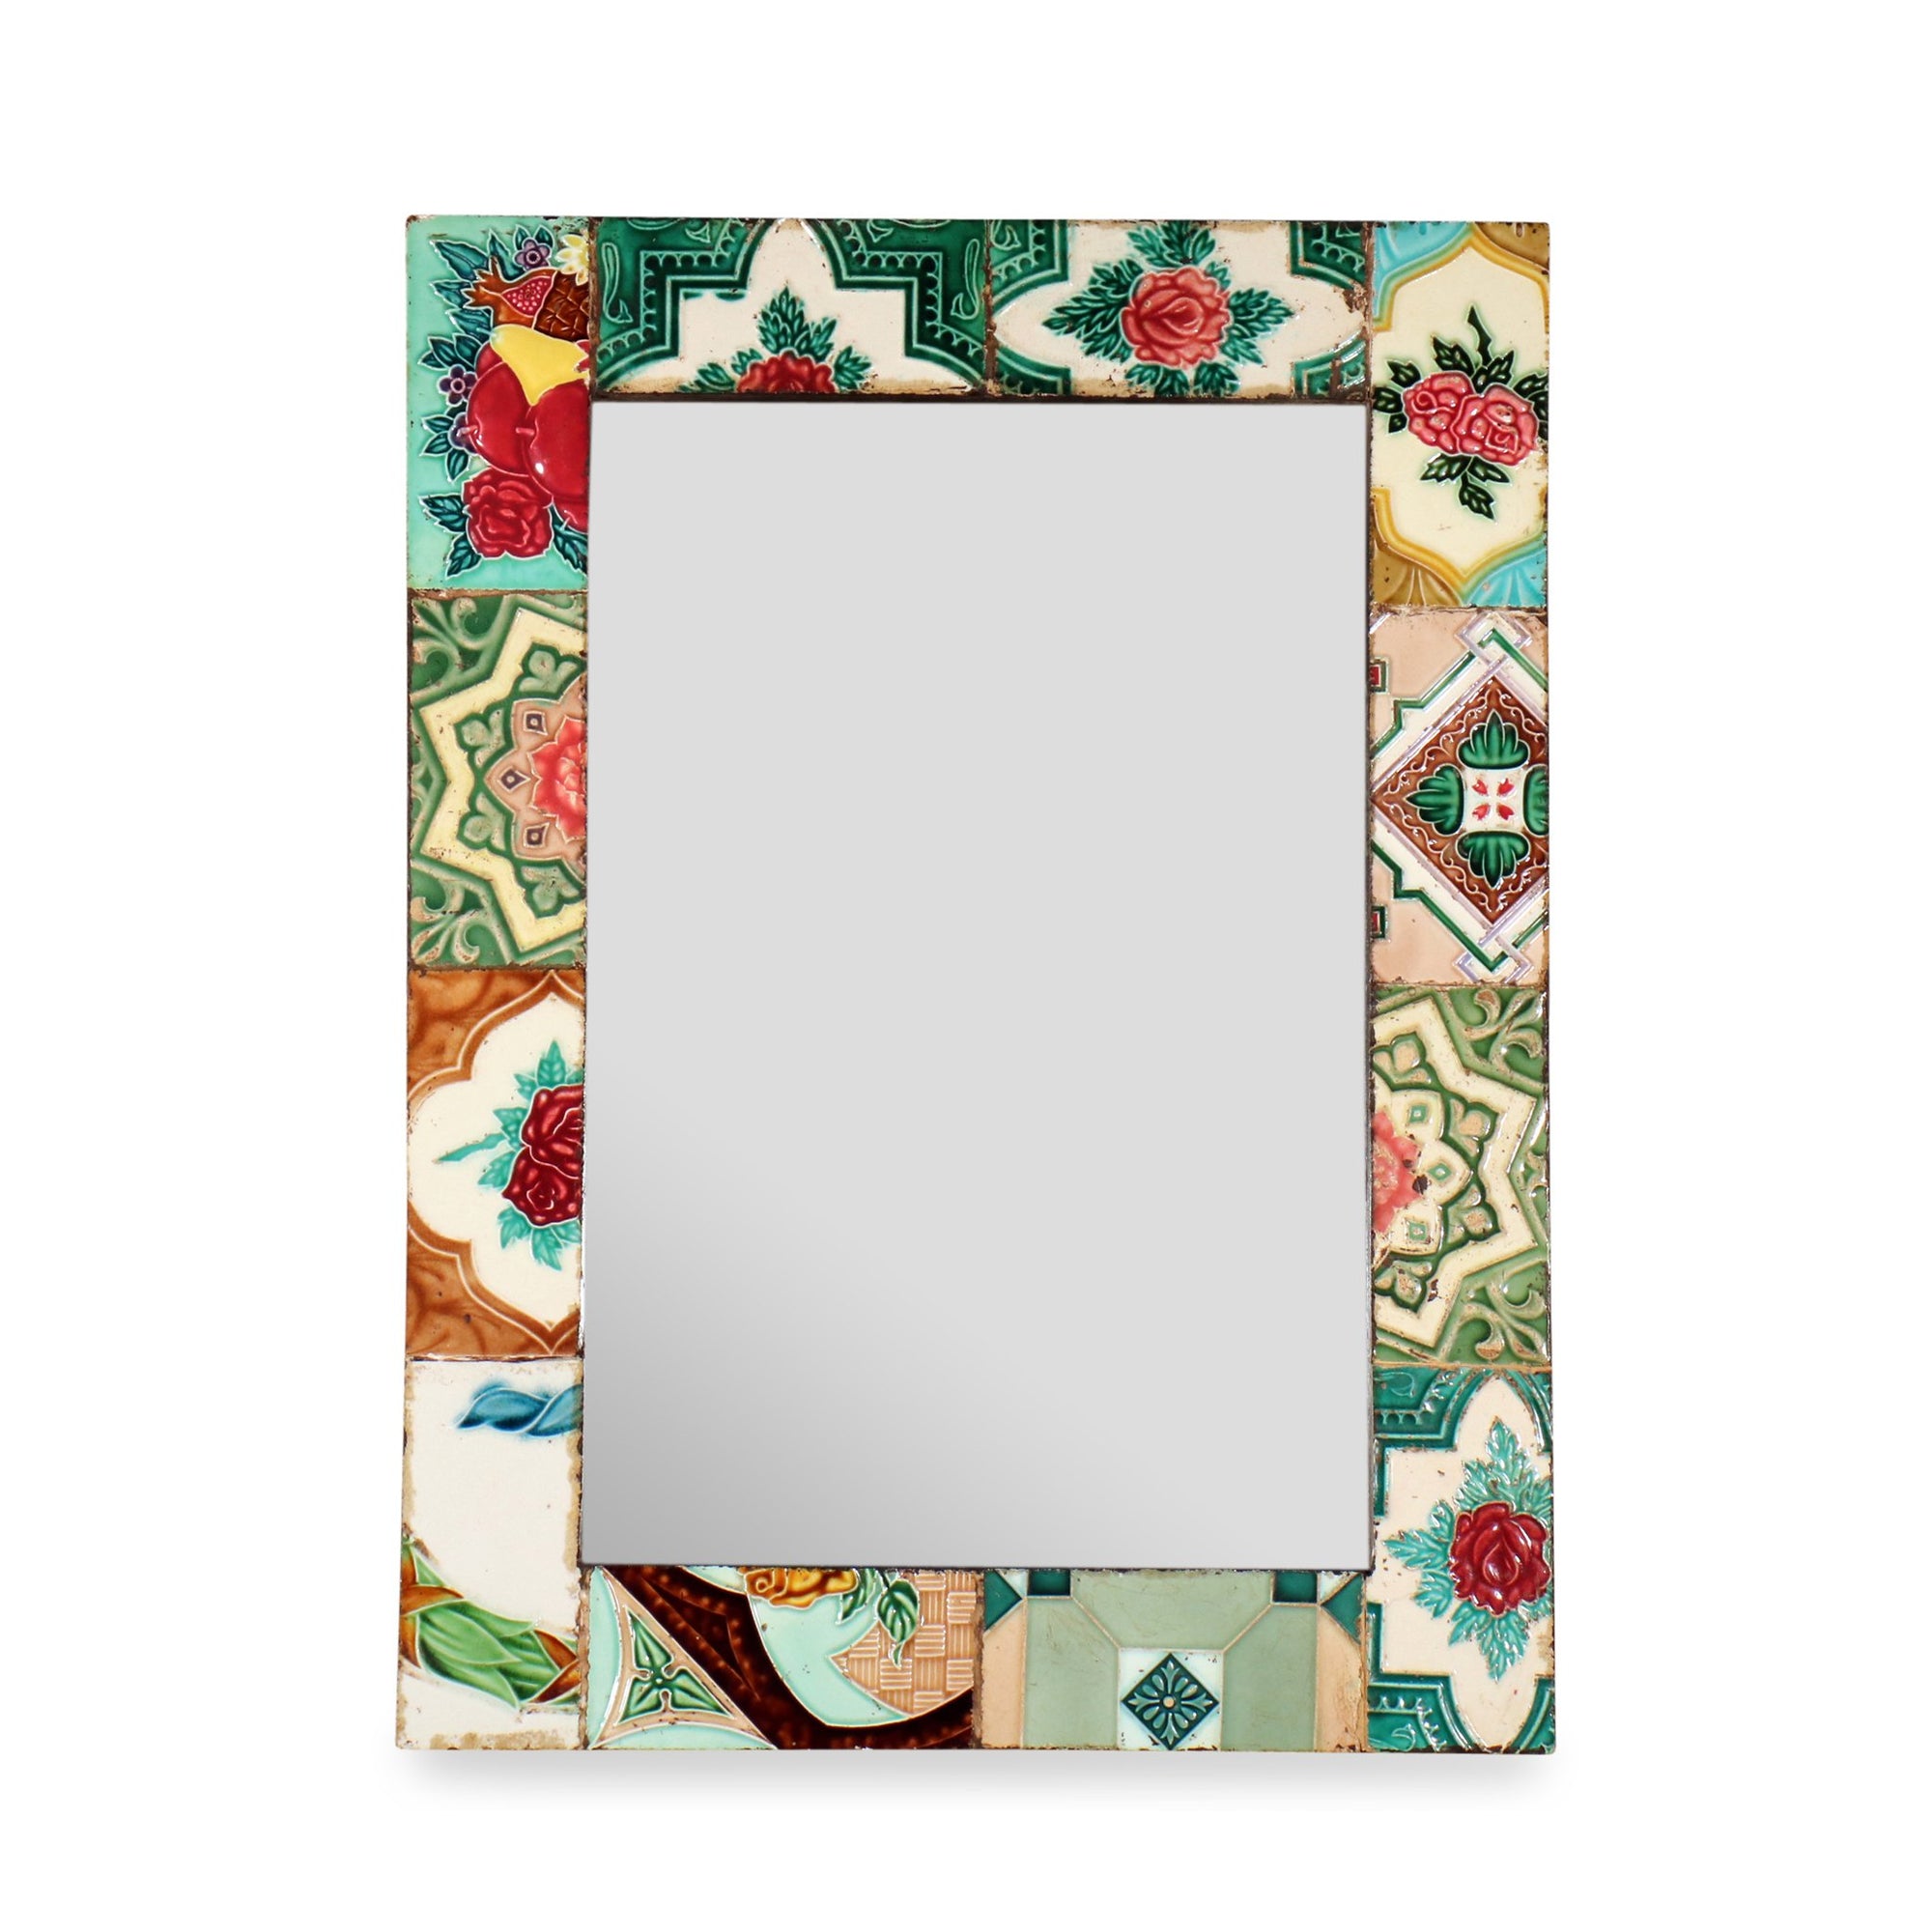 Mirror Made From Old Japanese Ceramic Tiles - 43 x 3 x 61 (wxdxh cms) - A5975V4